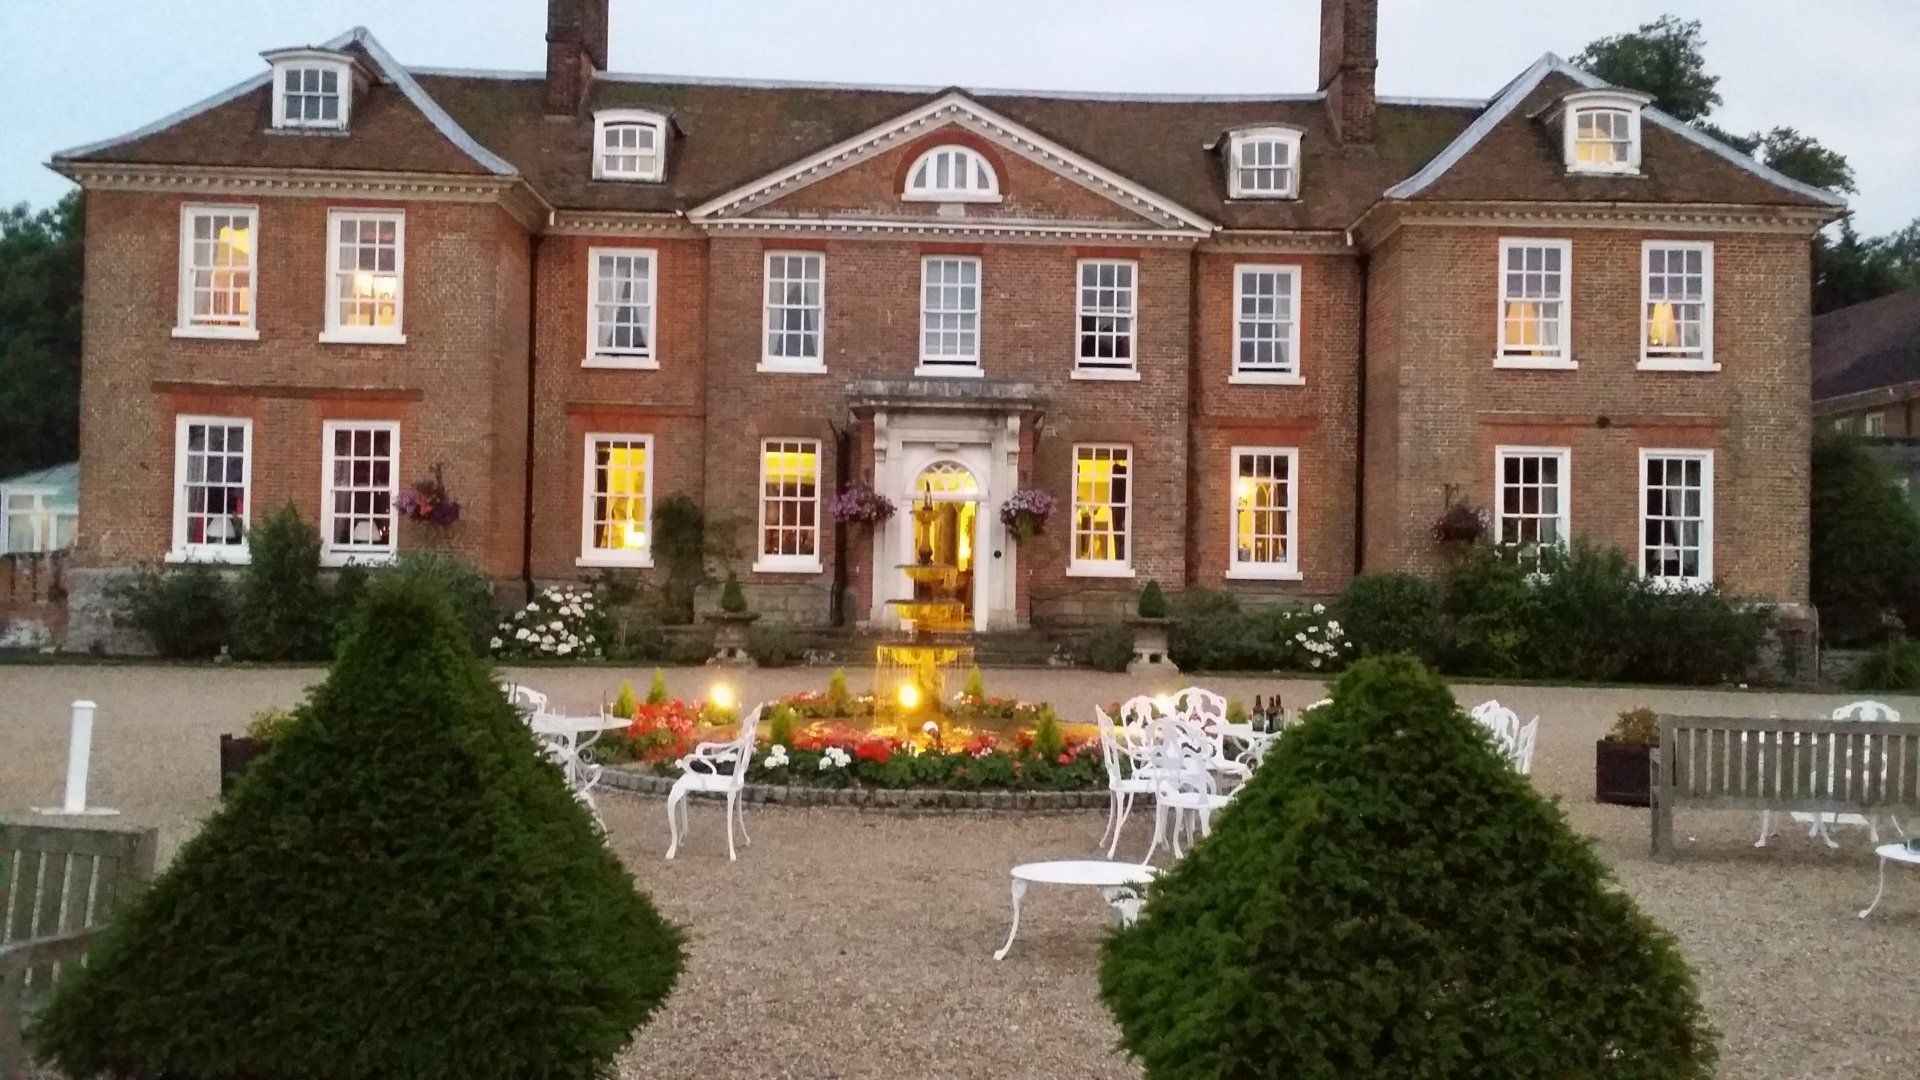 Chilston Park Hotel Weddings. A review by The RockPins live wedding band